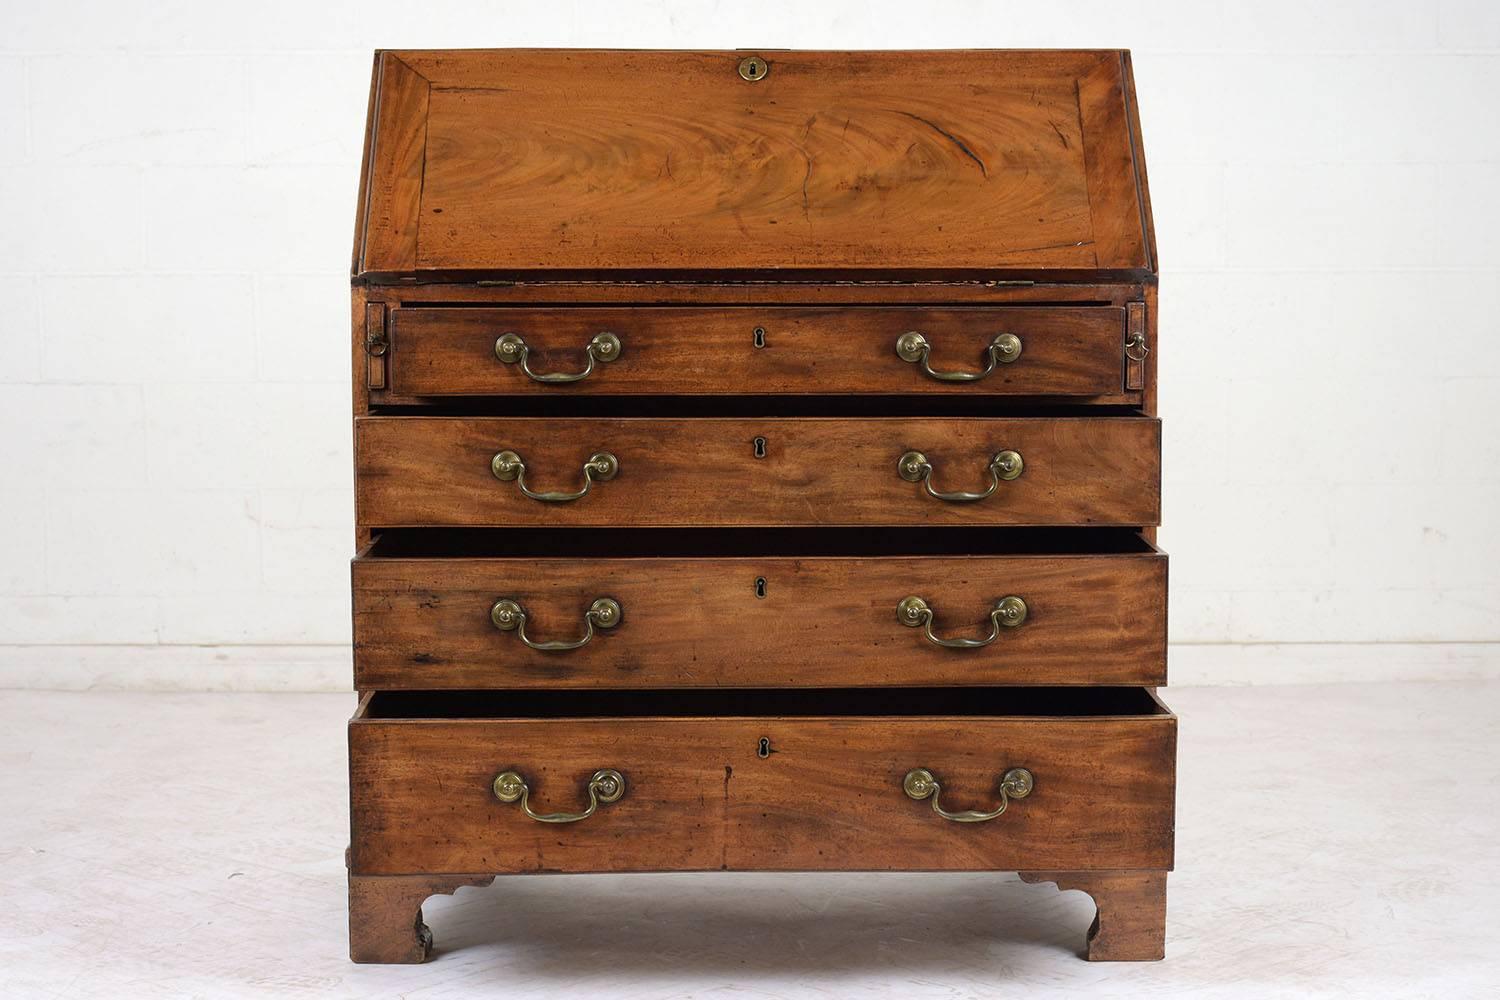 This circa 1820s English Slant Front Secretary Desk is made of walnut wood with the original finish and has been newly waxed & polished giving it a  beautiful patina finish. The piece has two arms that extend from the front of the desk to support